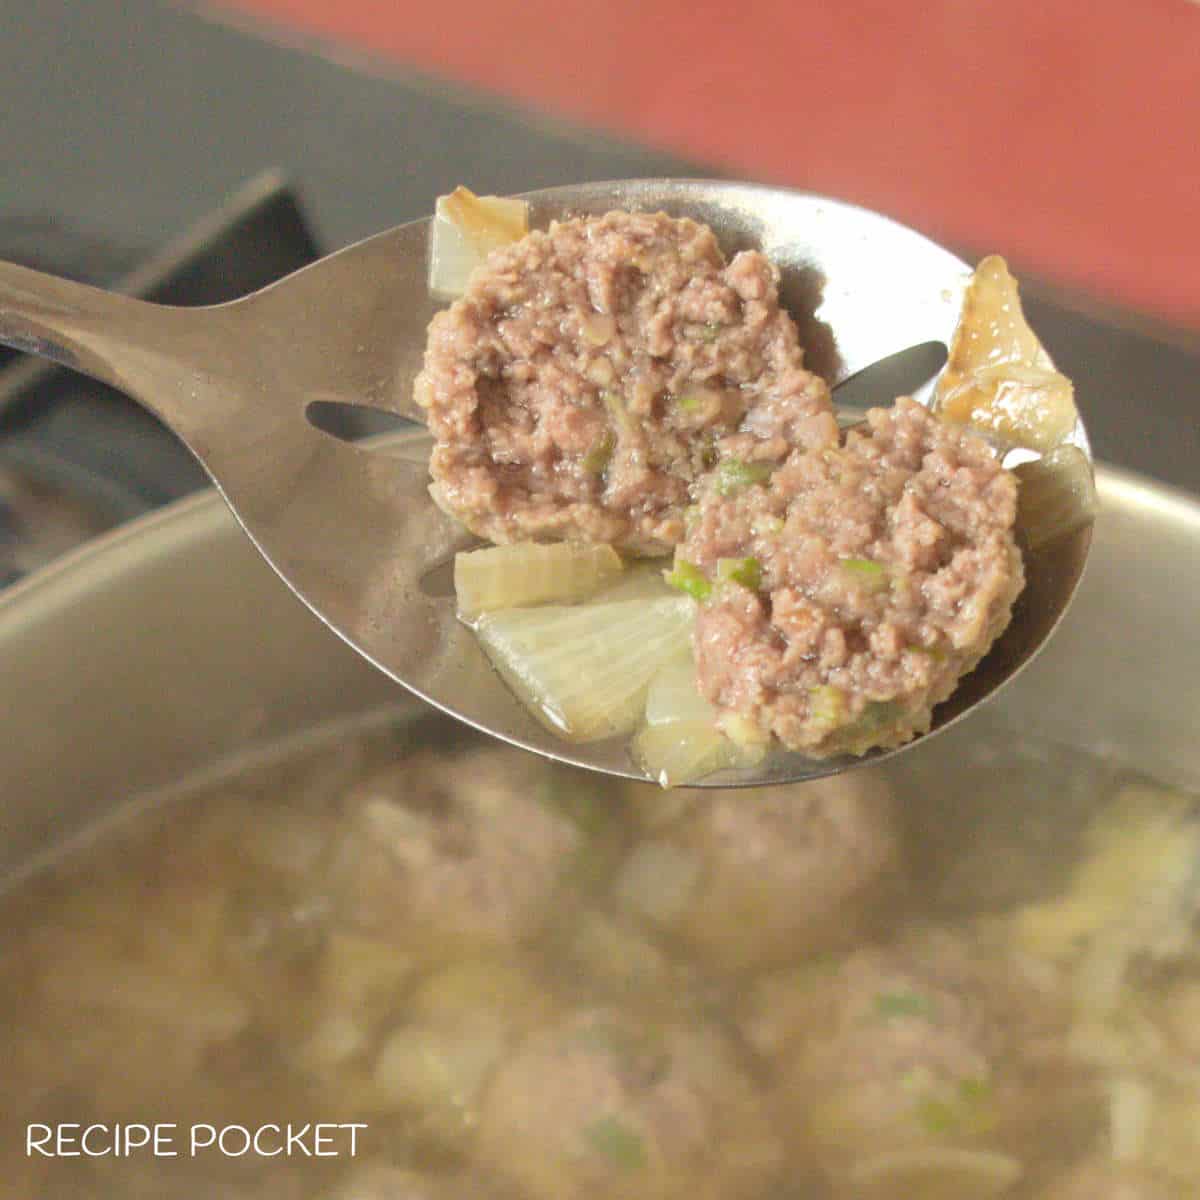 Image showing the inside of cooked bakso meatballs.